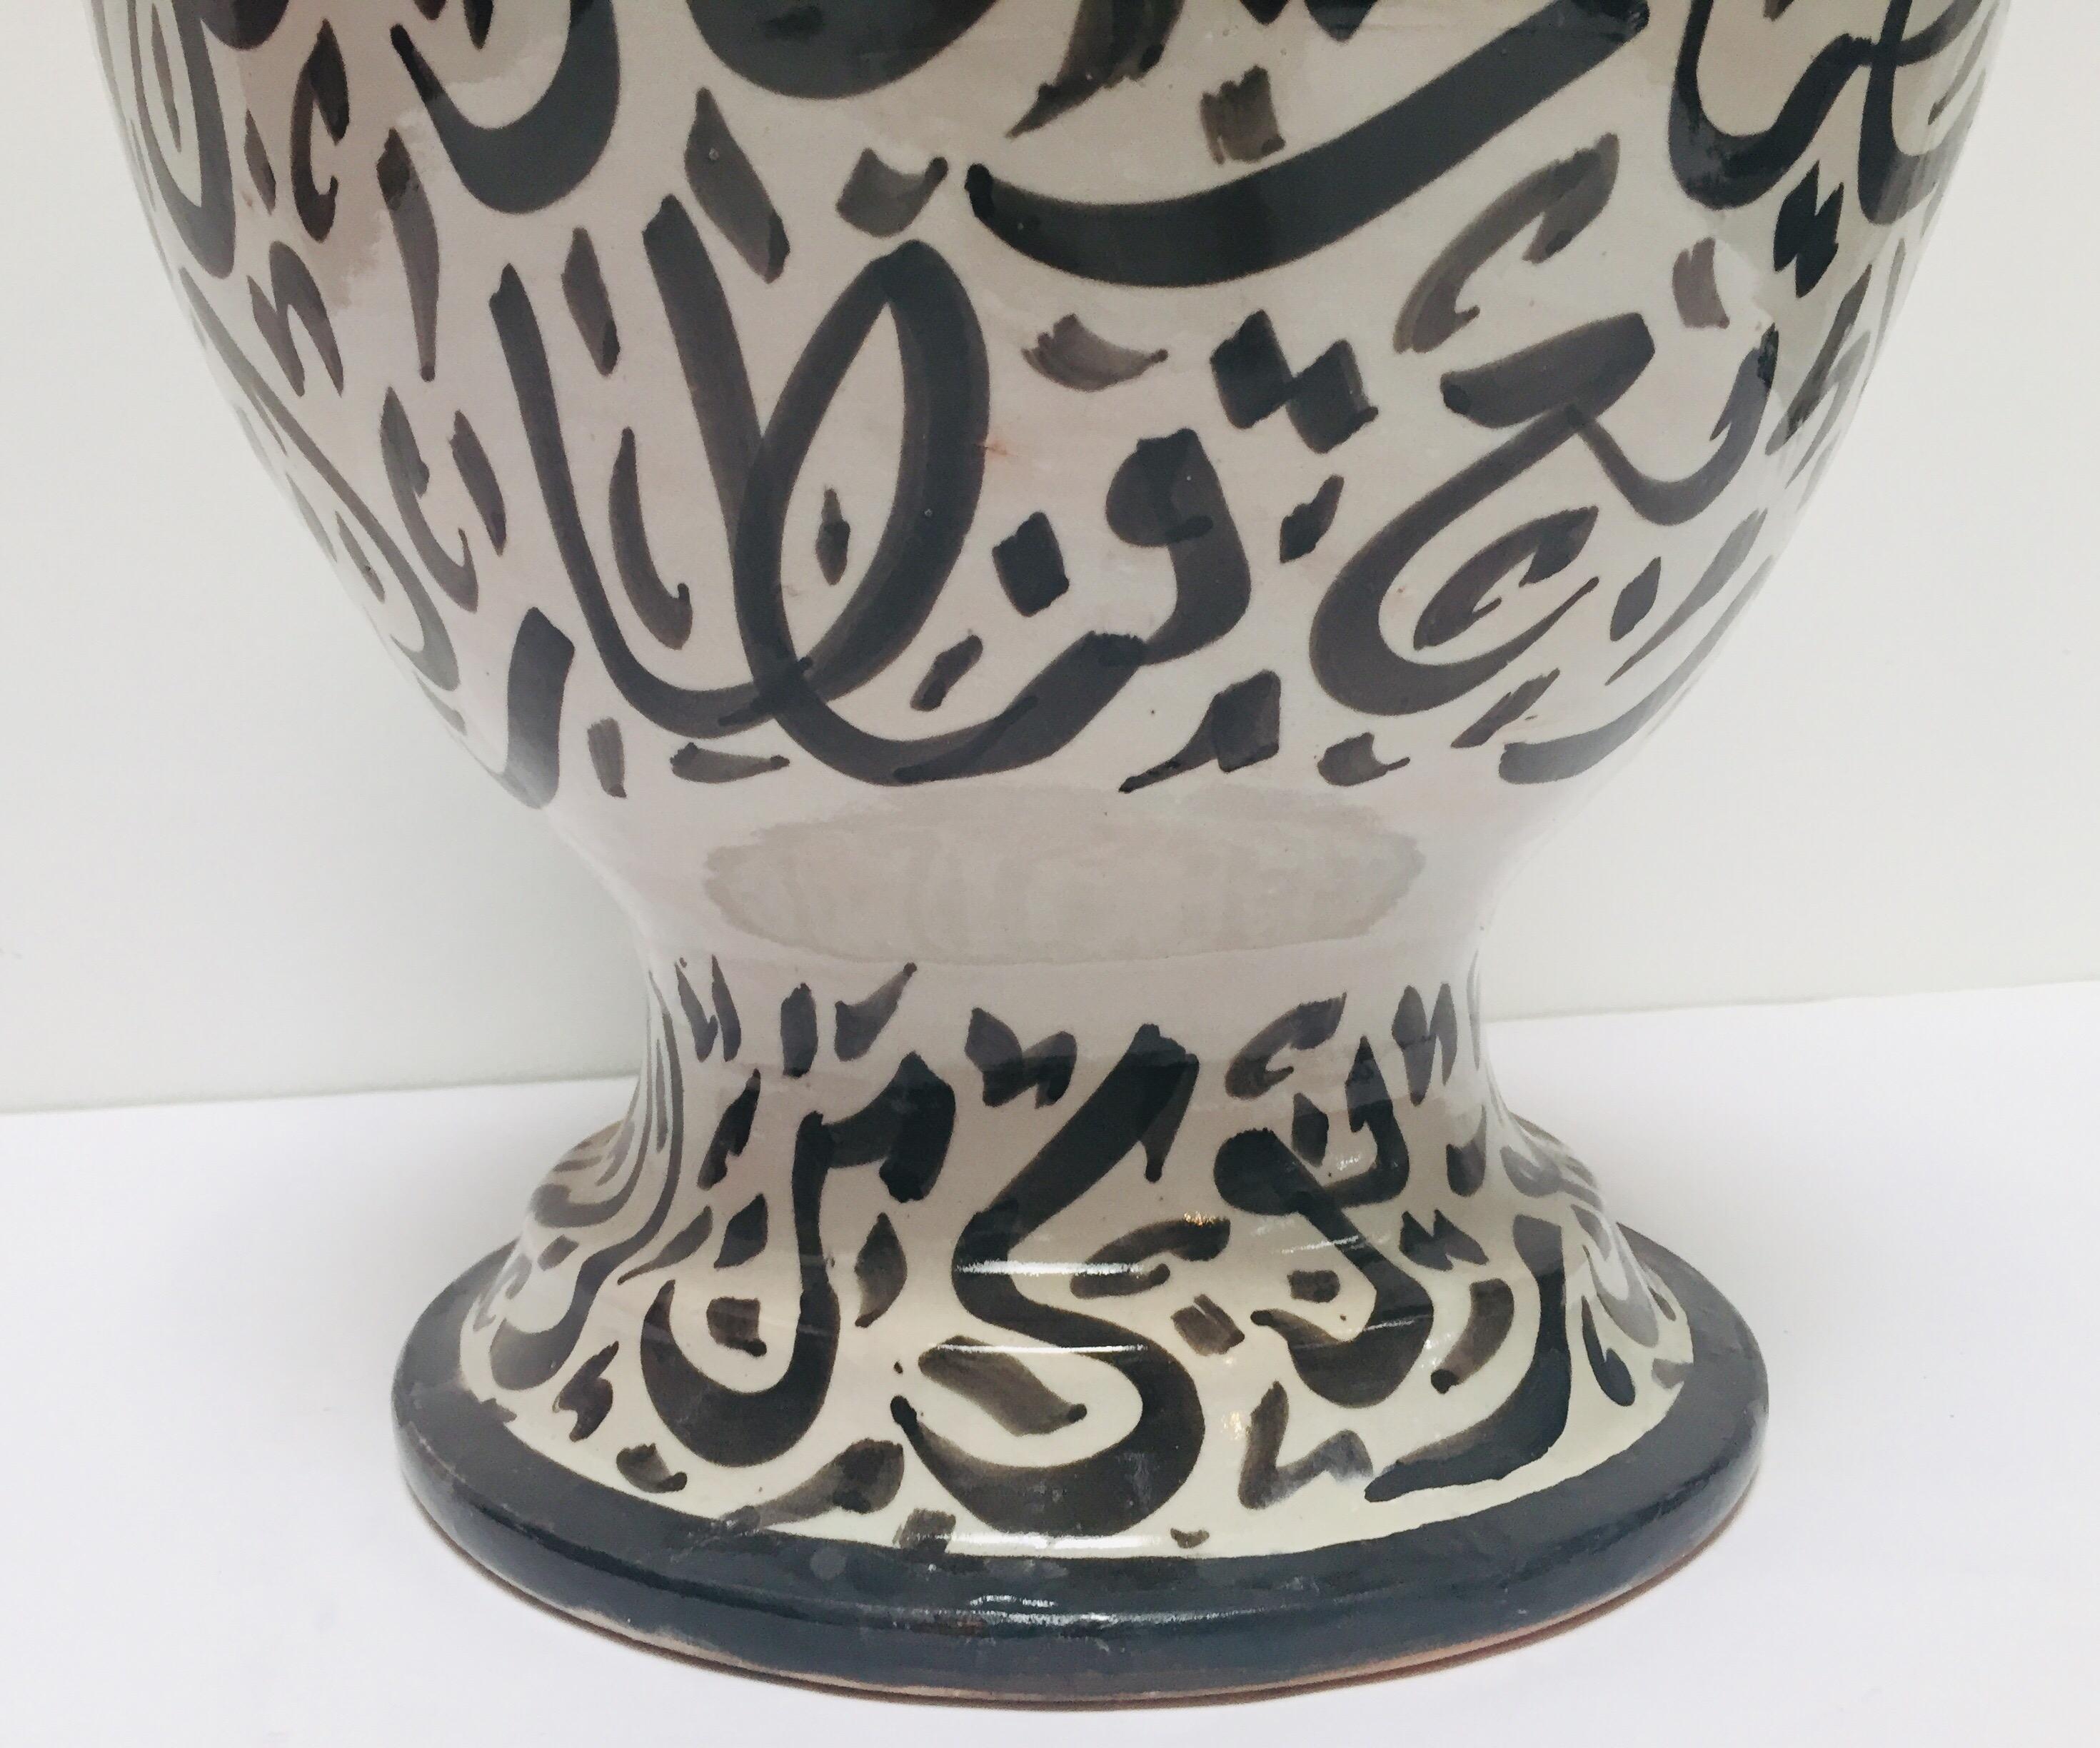 Large Moroccan Glazed Ceramic Vase with Arabic Calligraphy Brown Writing, Fez 7